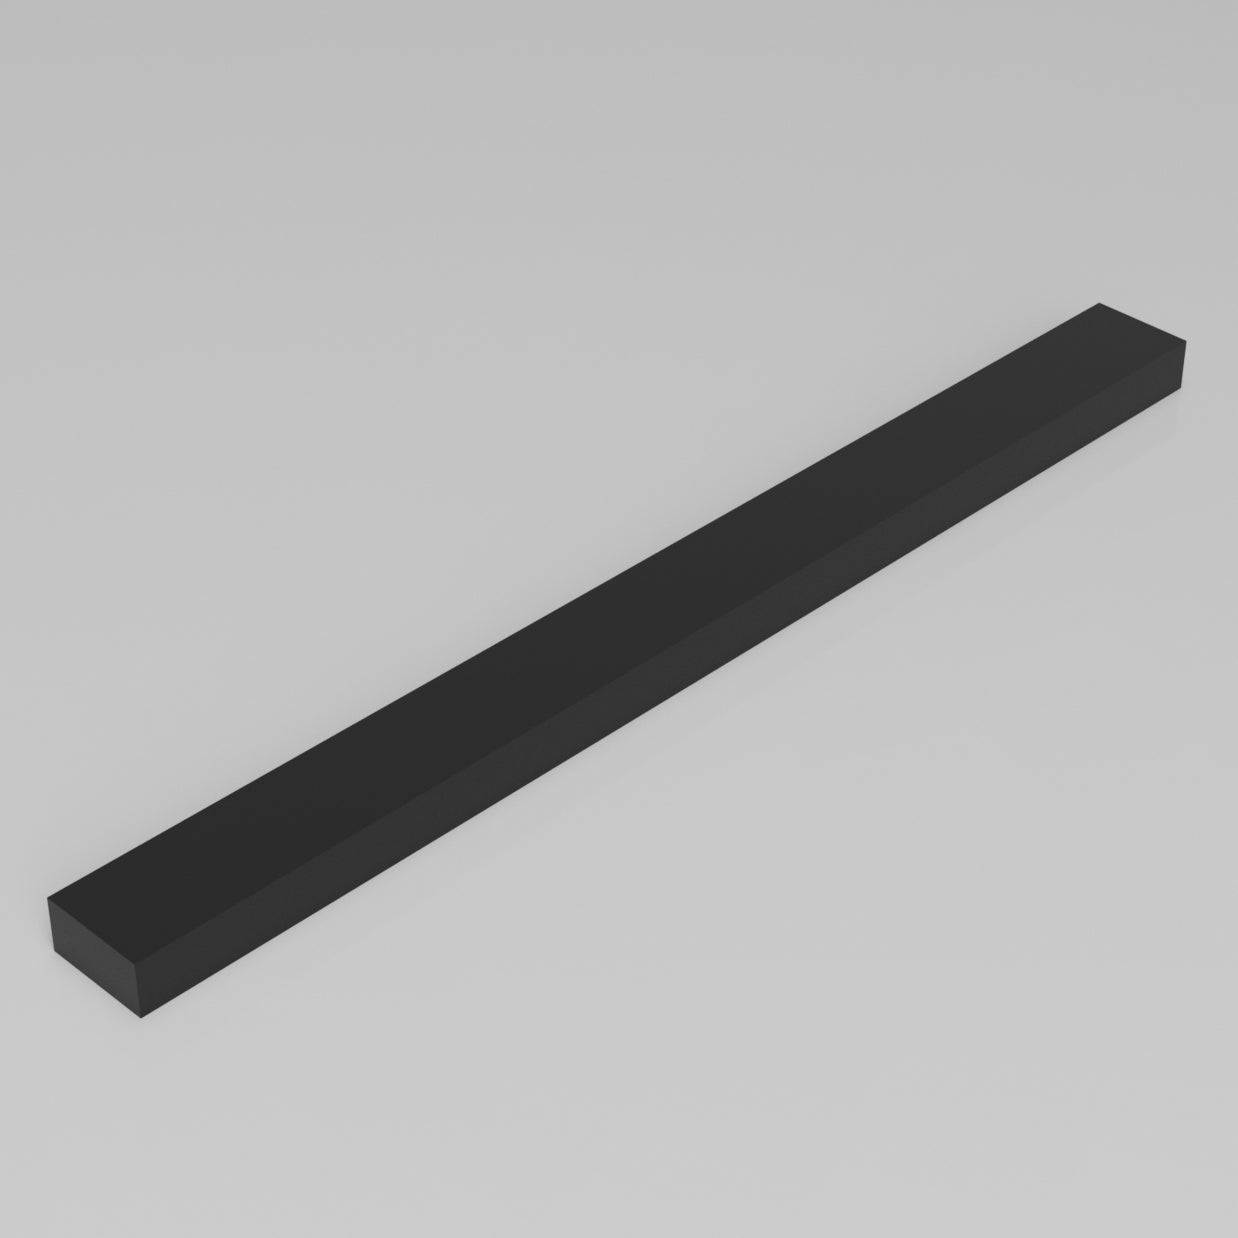 Machinable Wax Rectangular Block Front View 1 Inch by 2 Inch by 24 Inch